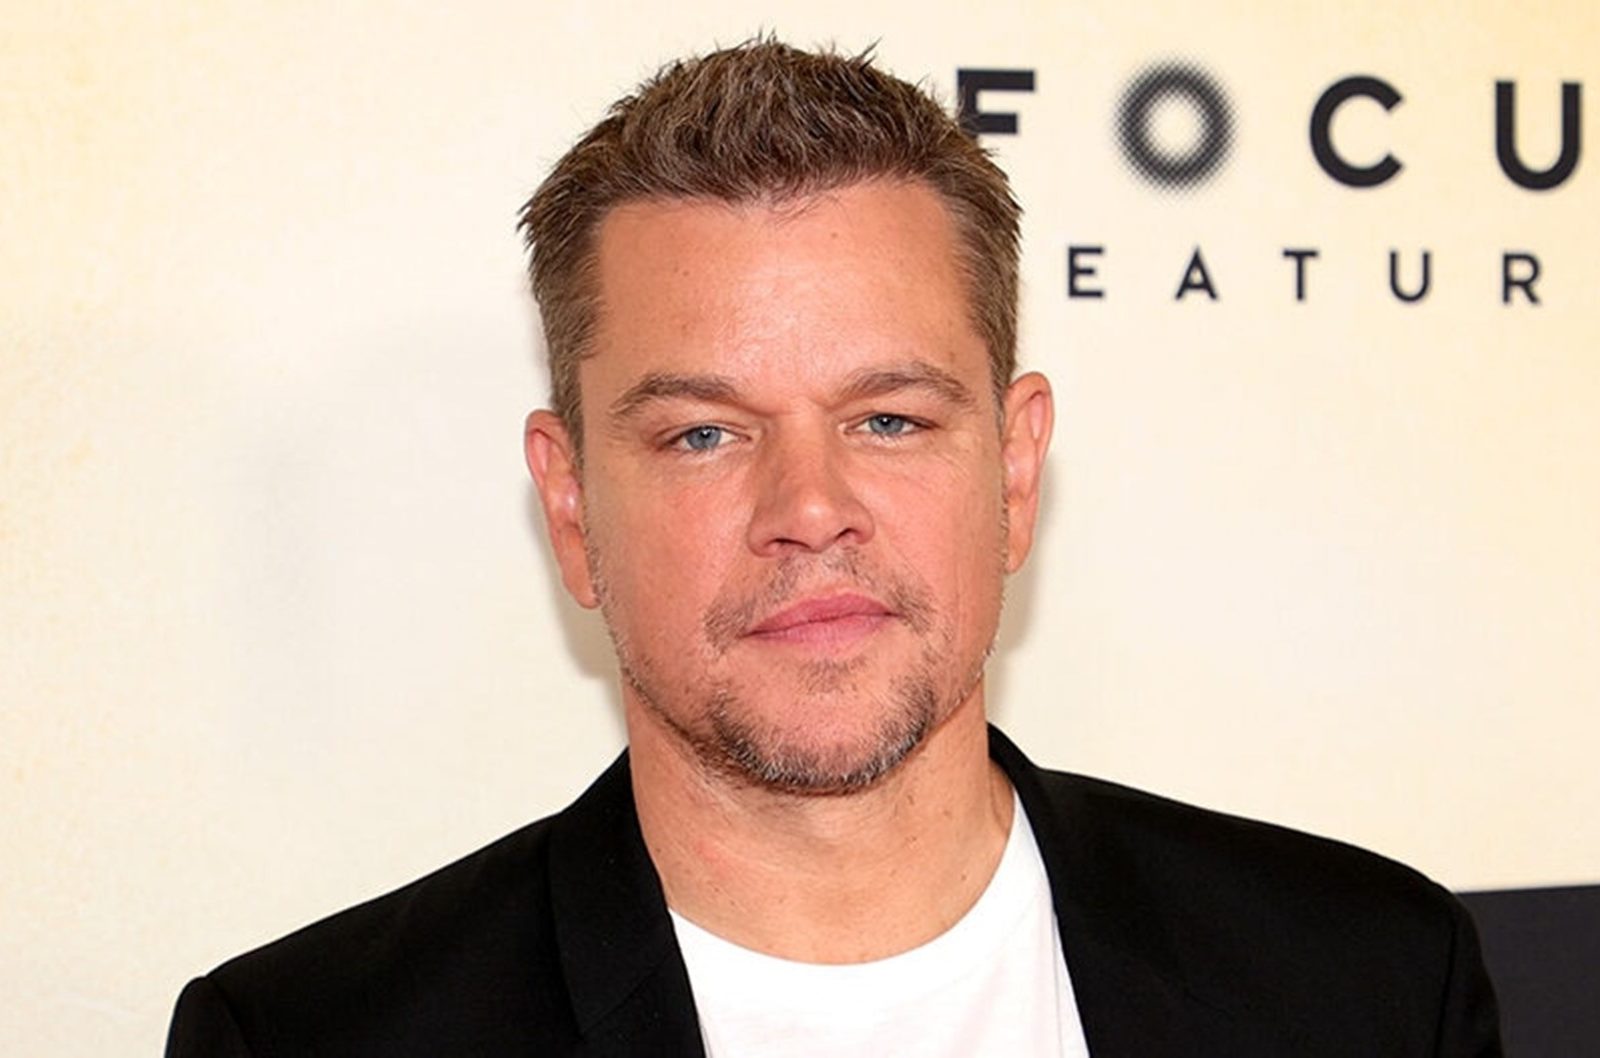 Matt Damon Net Worth: How much cash does the A-lister have?